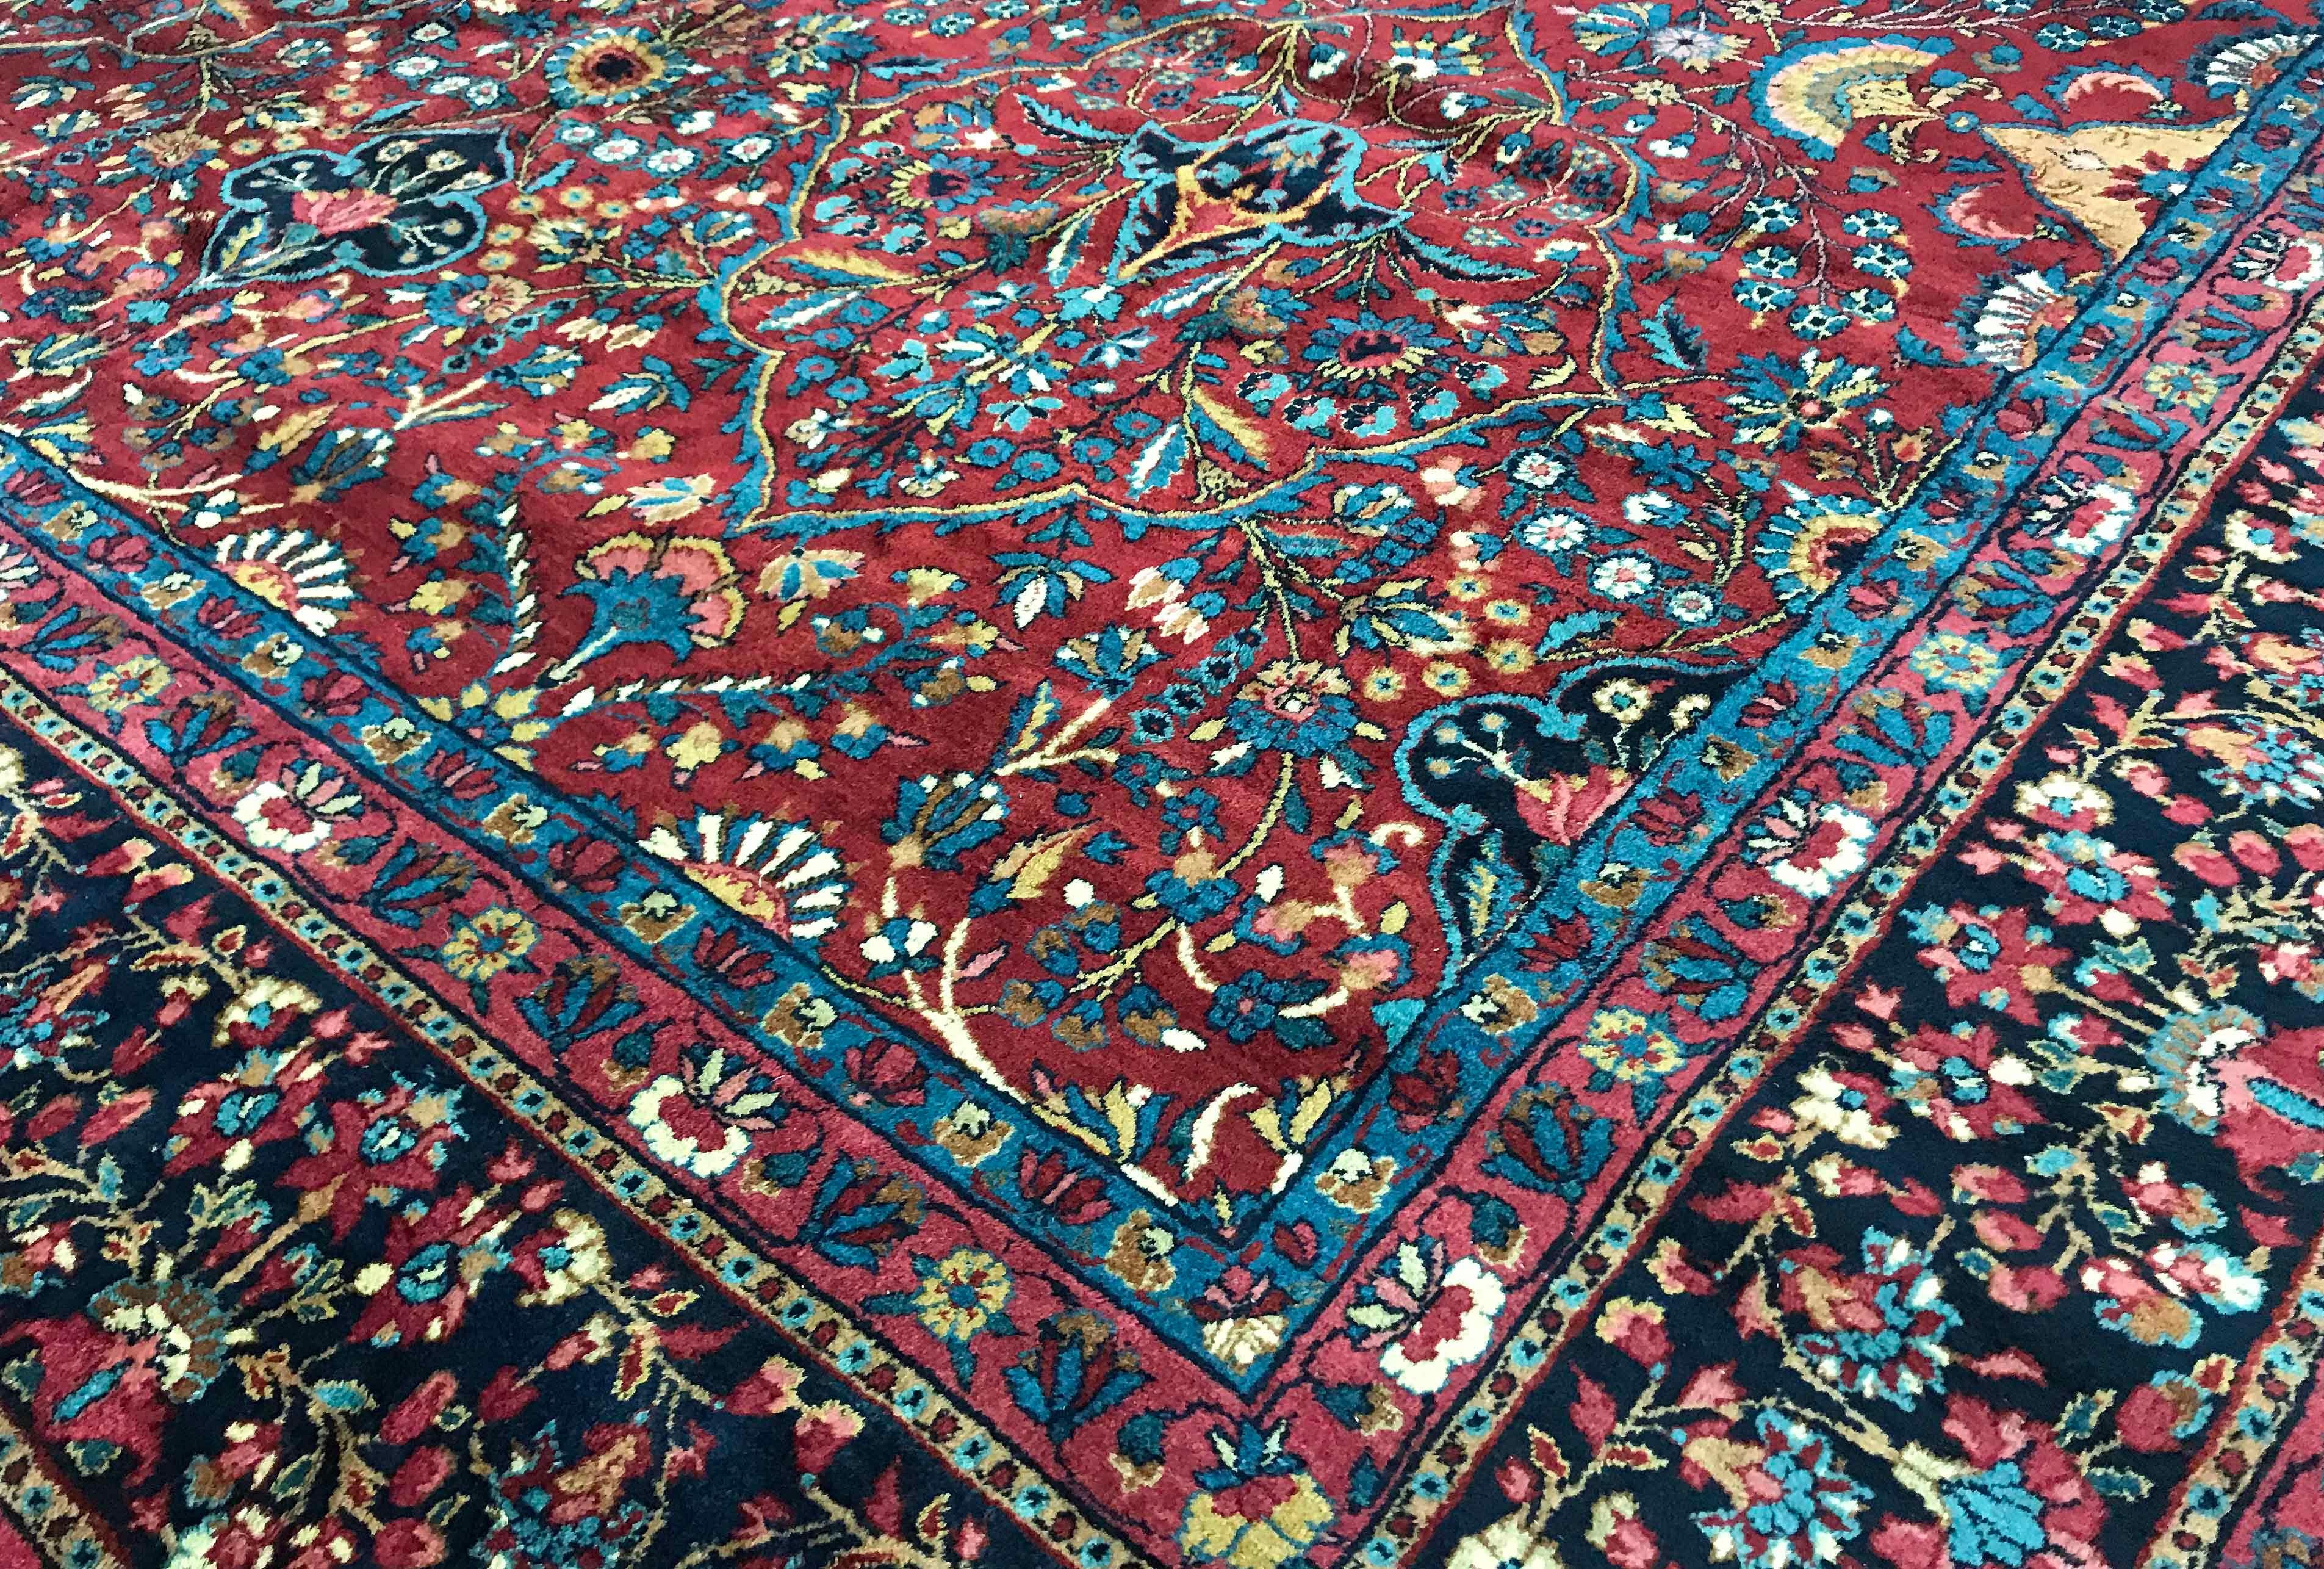 Vintage Persian Kerman rug, circa 1940. A vintage 1940s Kerman rug with an all-over design, the main red field with floral and vine designs encompassing the whole rug enclosed by an attractive navy border in the same style. Size:8'9 x 11'9.